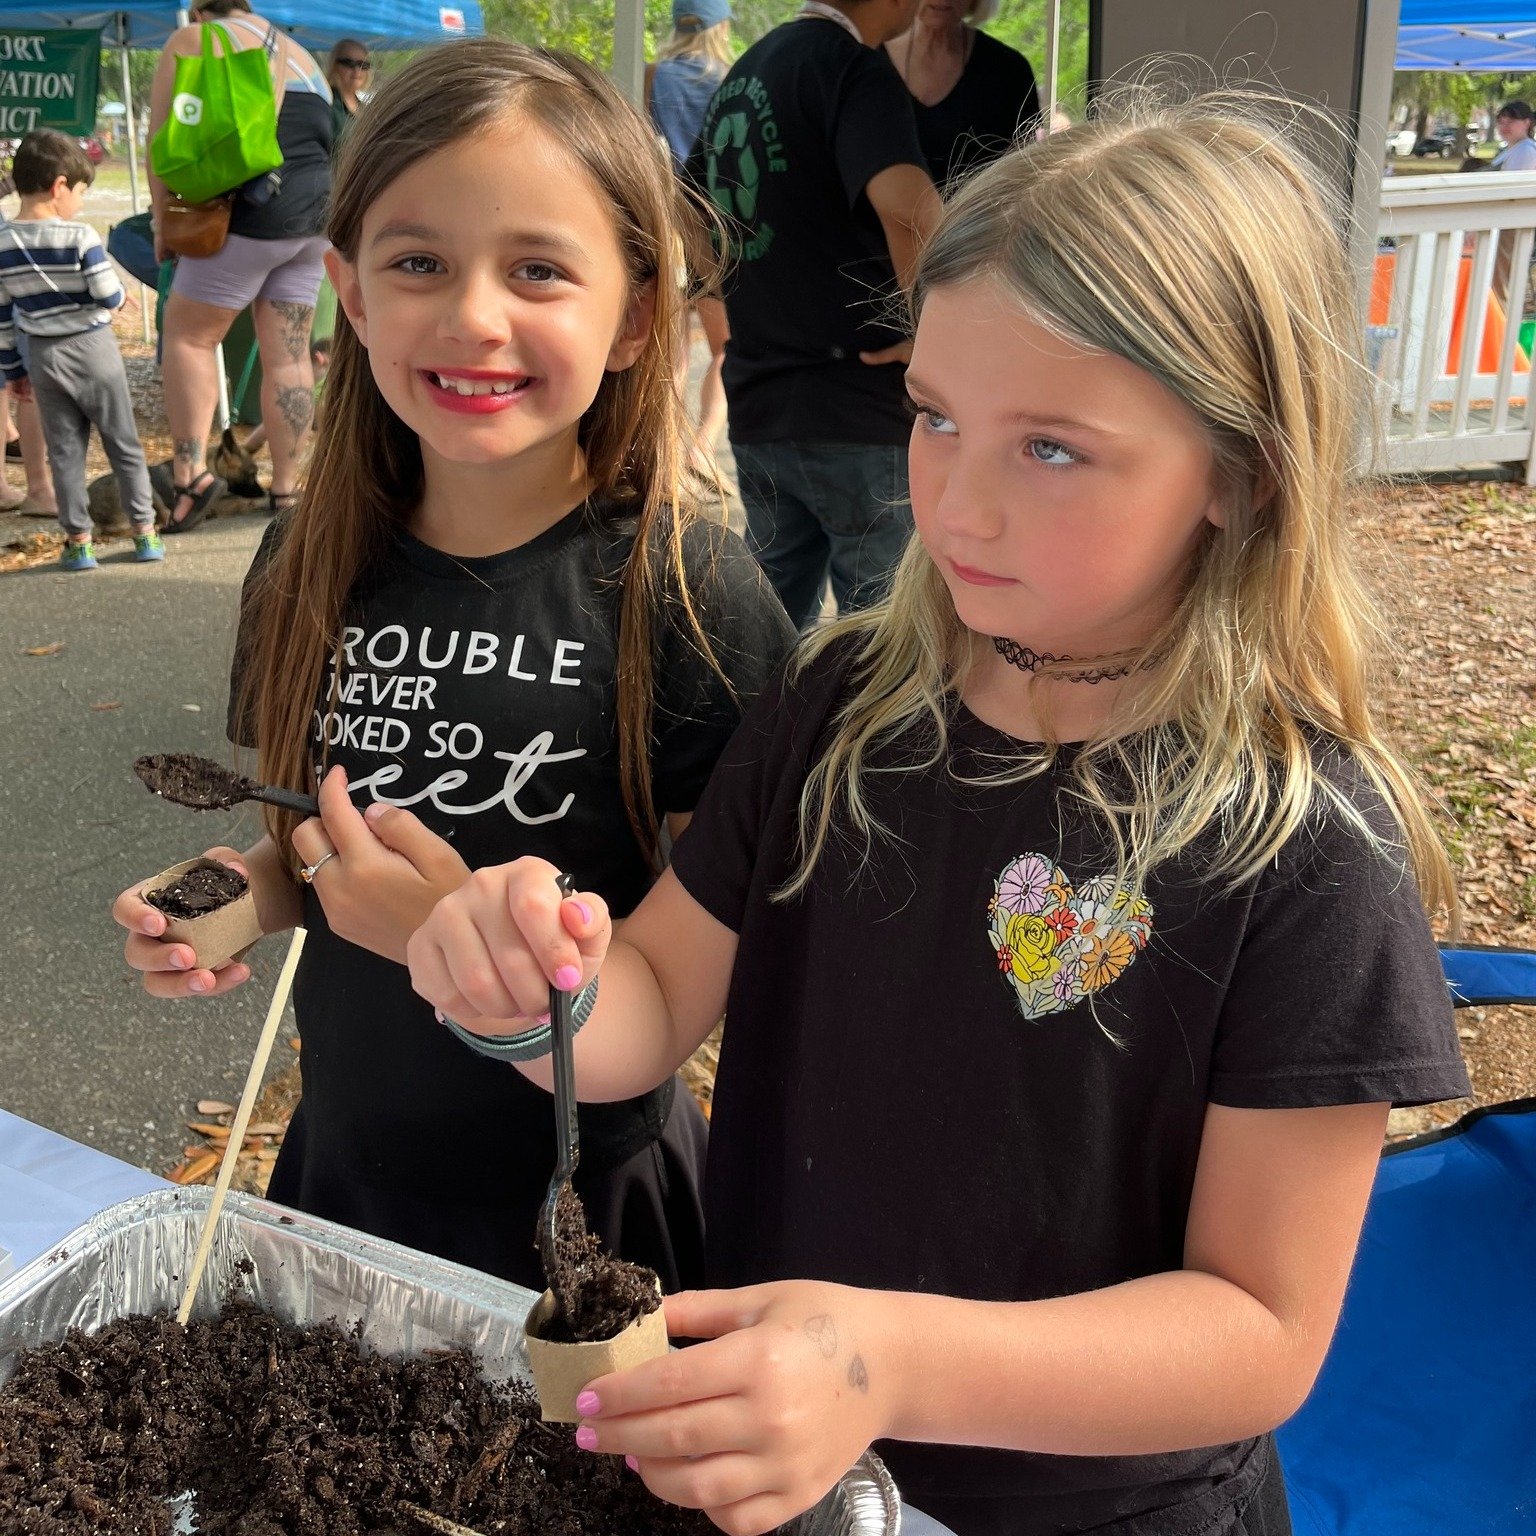 We celebrated Earth Day at the Port Royal Farmer's Market by hosting a 'make your own seedling cup' table using cardboard toilet paper rolls. 

Make your own: Cut and crease the rolls, make 4 slits to create flaps, fold flaps over starting on left, t